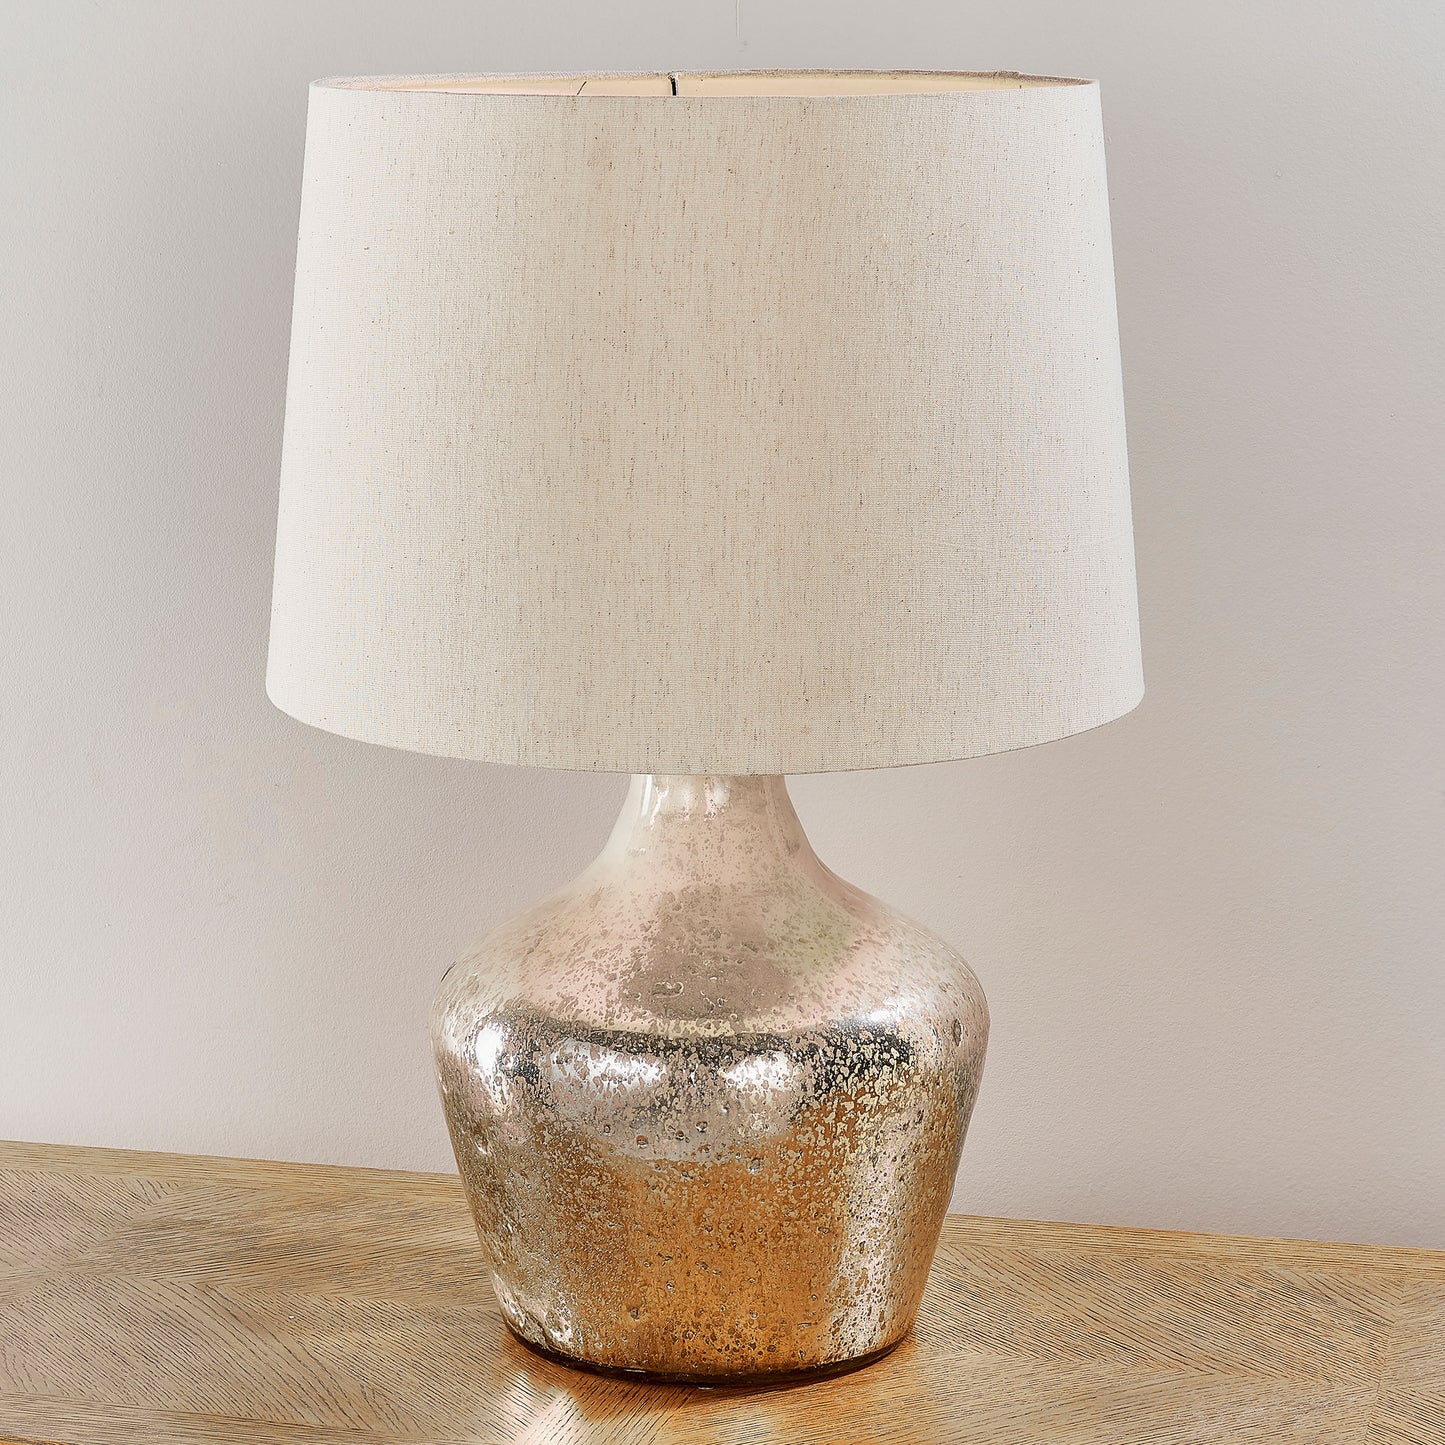 A Meteora 1 Table Light with a beige shade for interior decor.